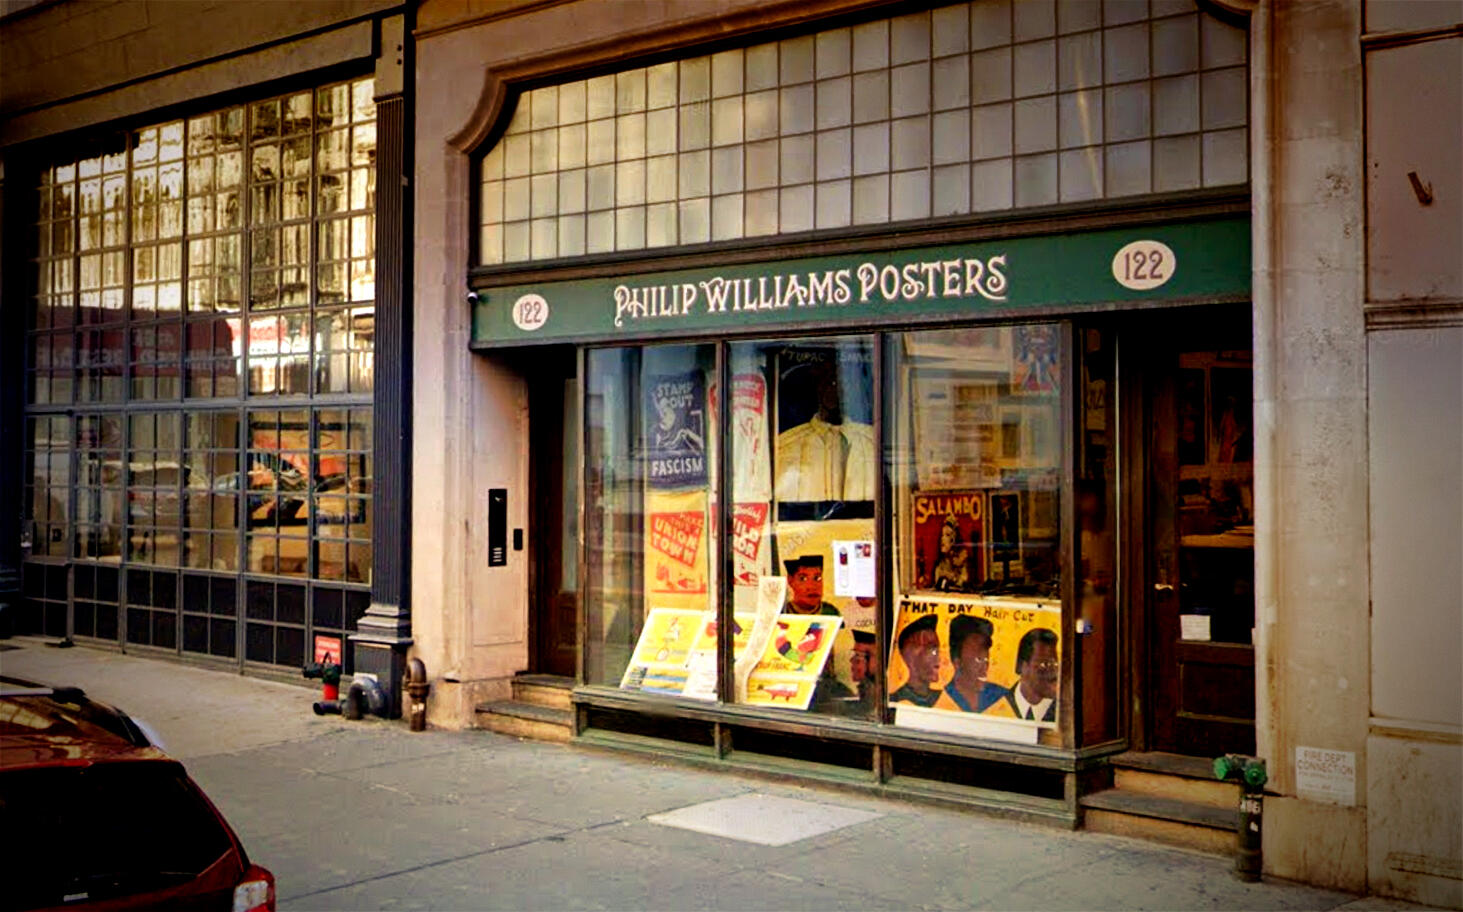 Philip Williams Posters at 122 Chambers Street (Google Maps)